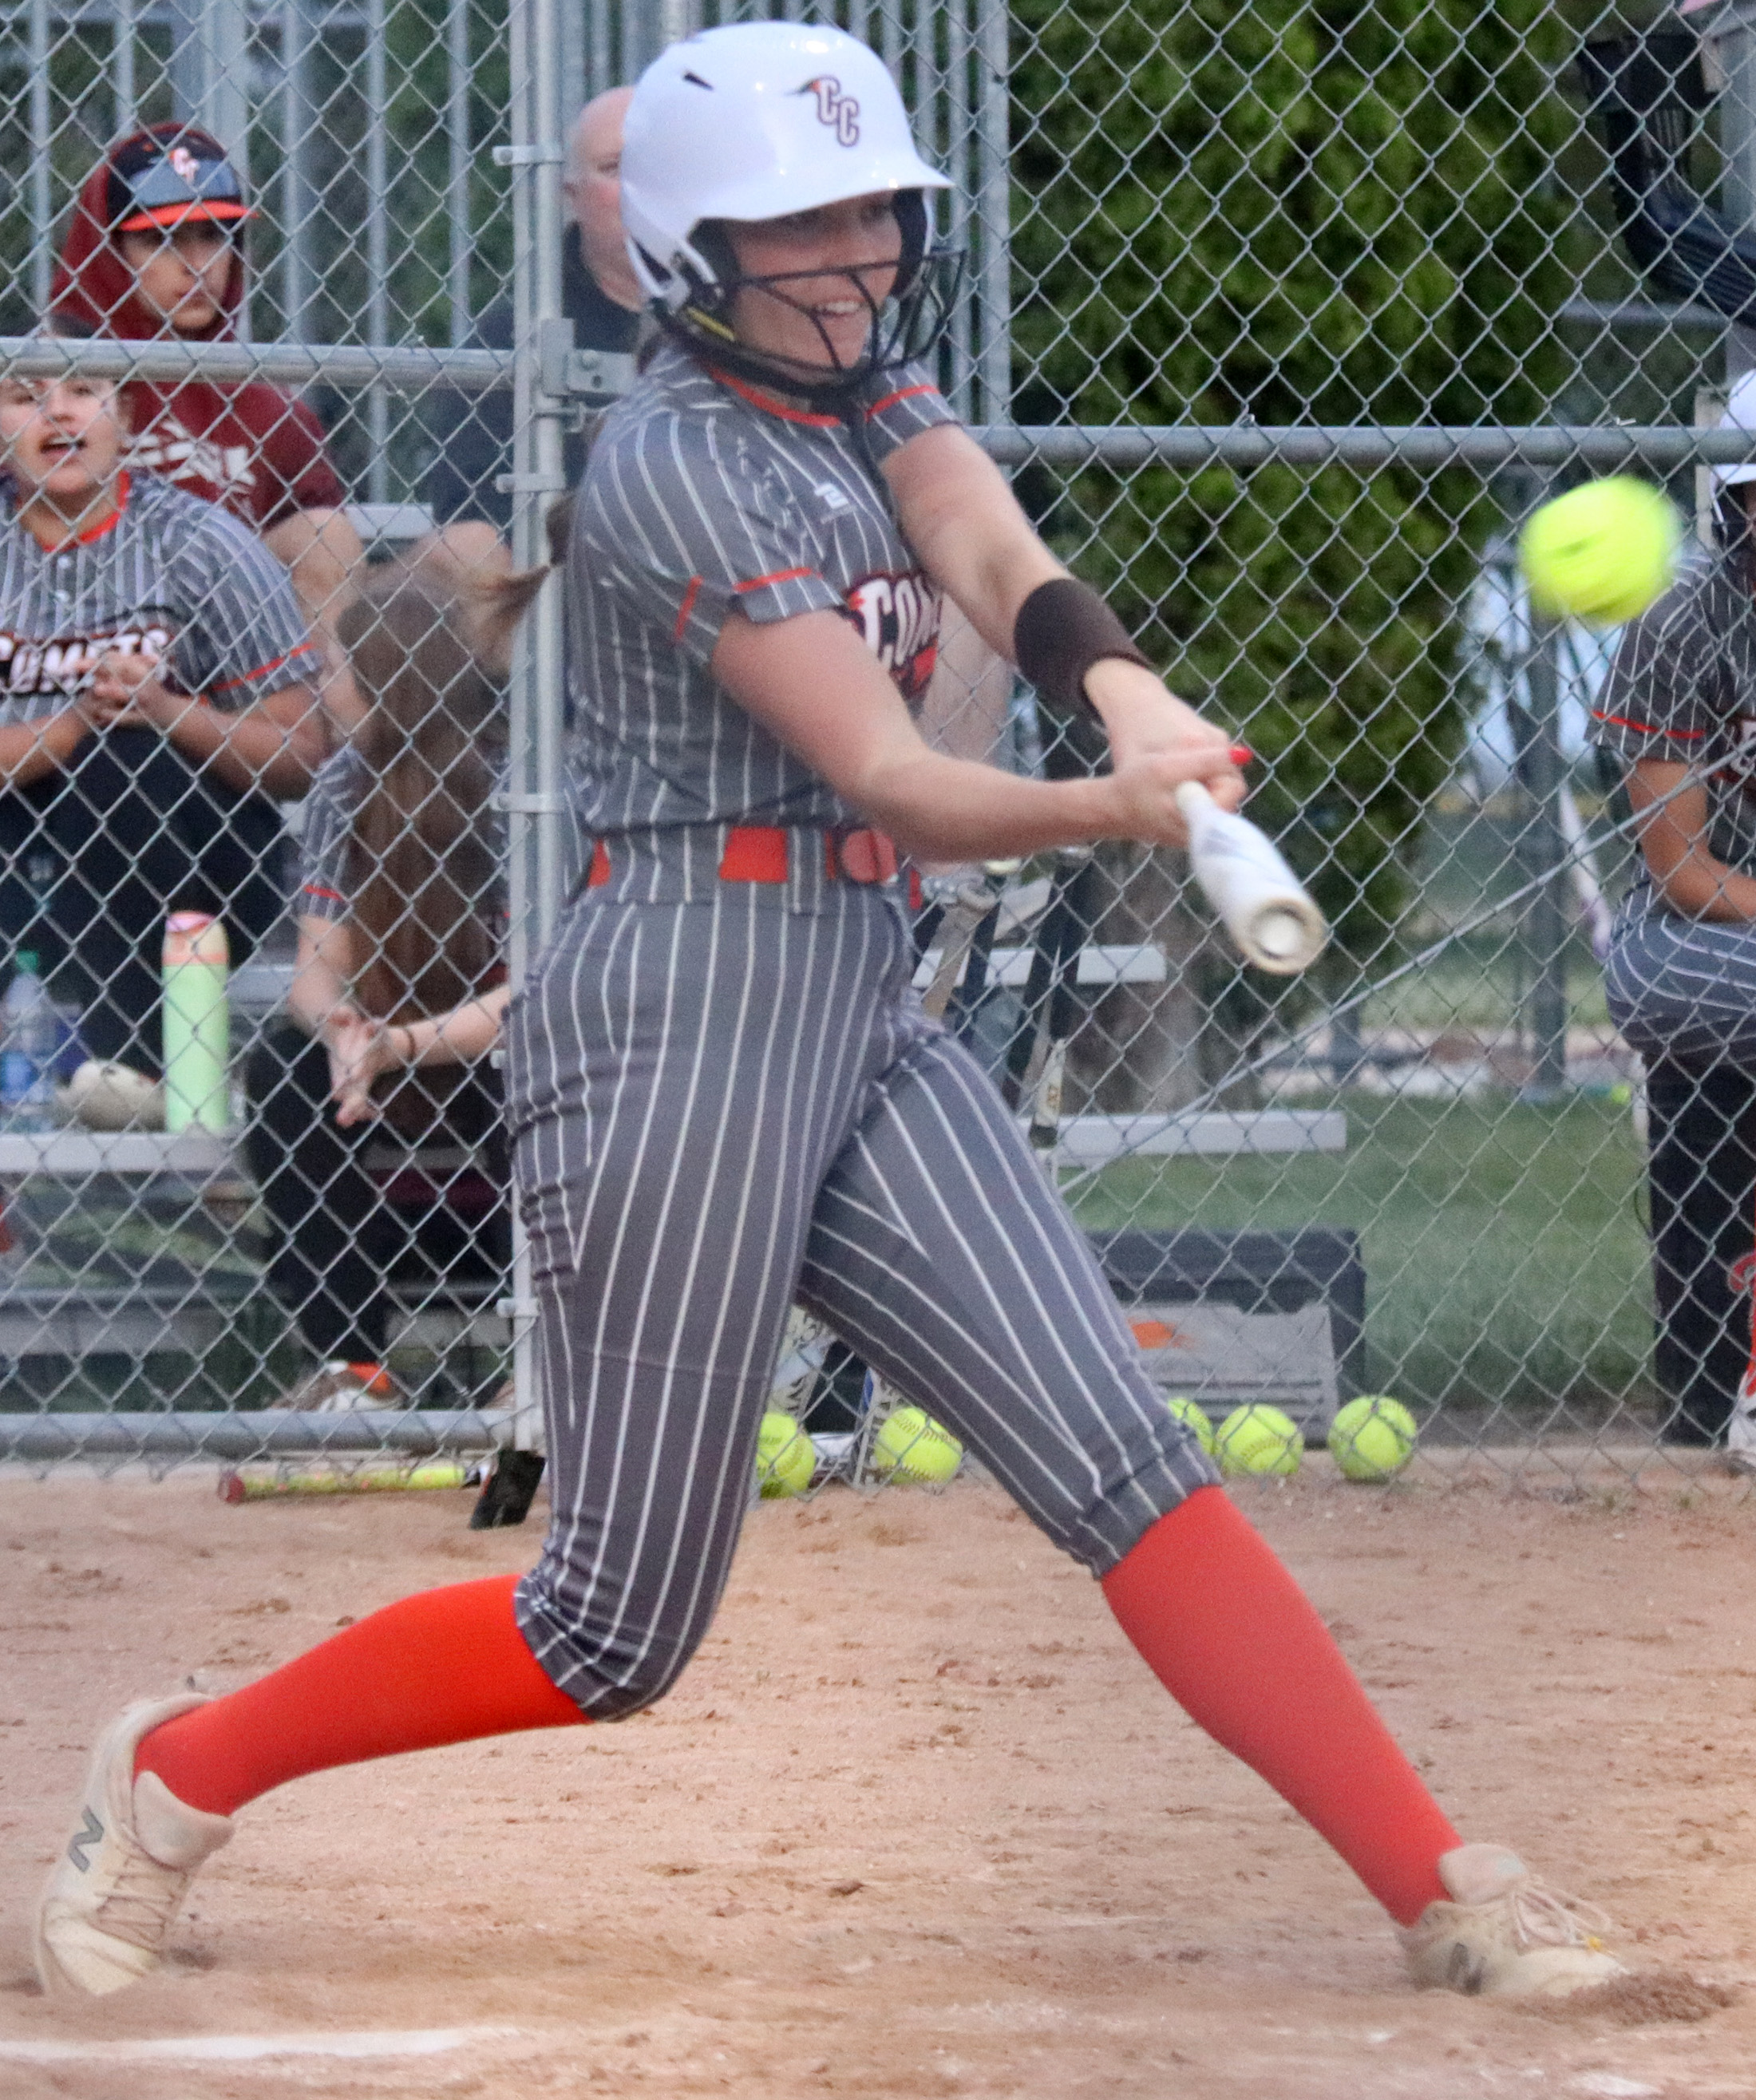 Comets overpower Chickasaws 10-0 in NEIC softball matchup